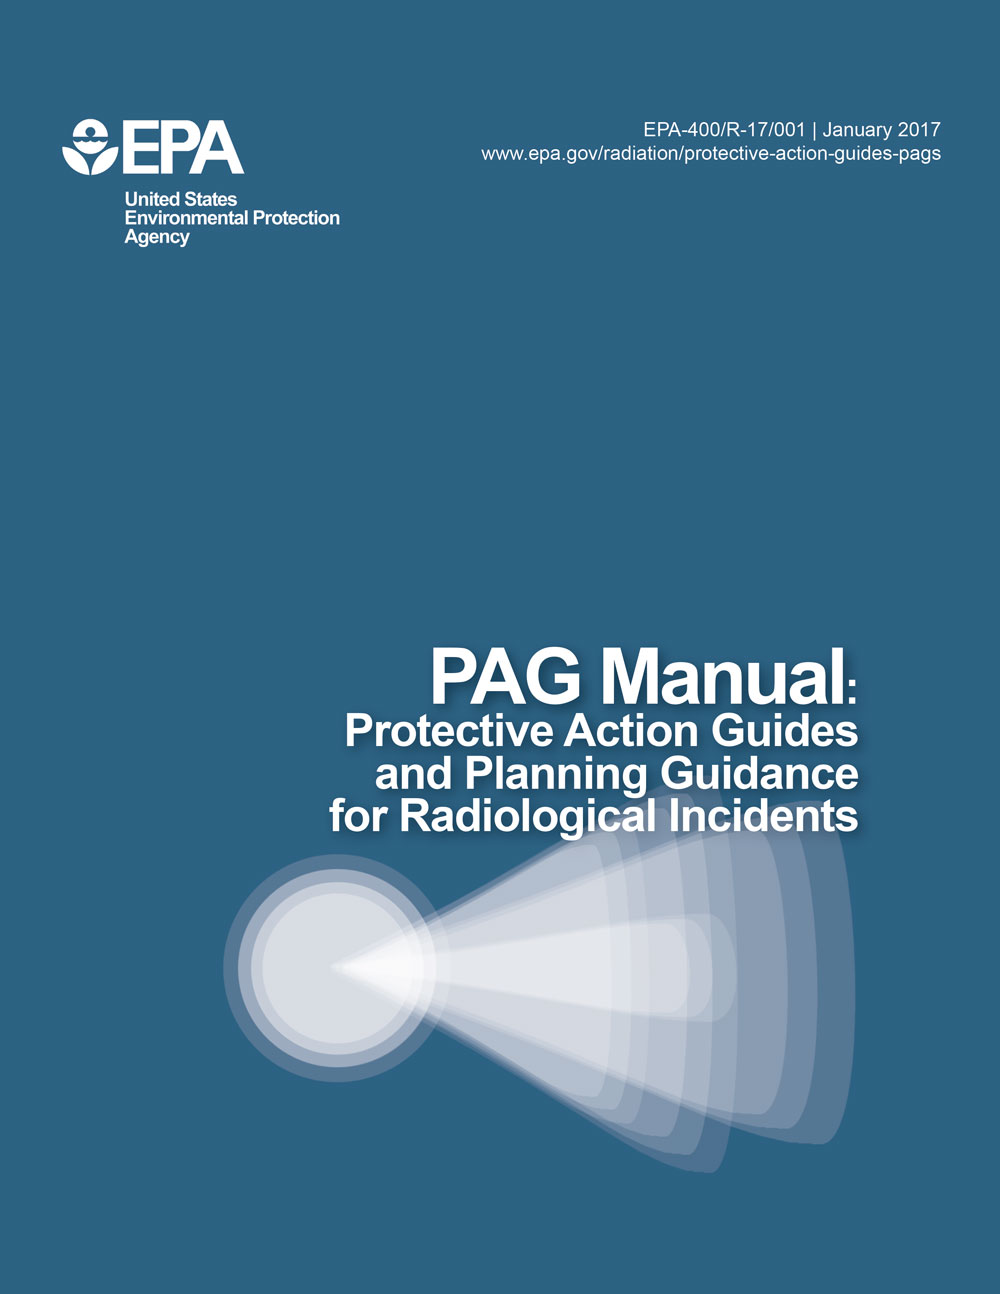 The Protective Action Guide (PAG) Manual, report cover